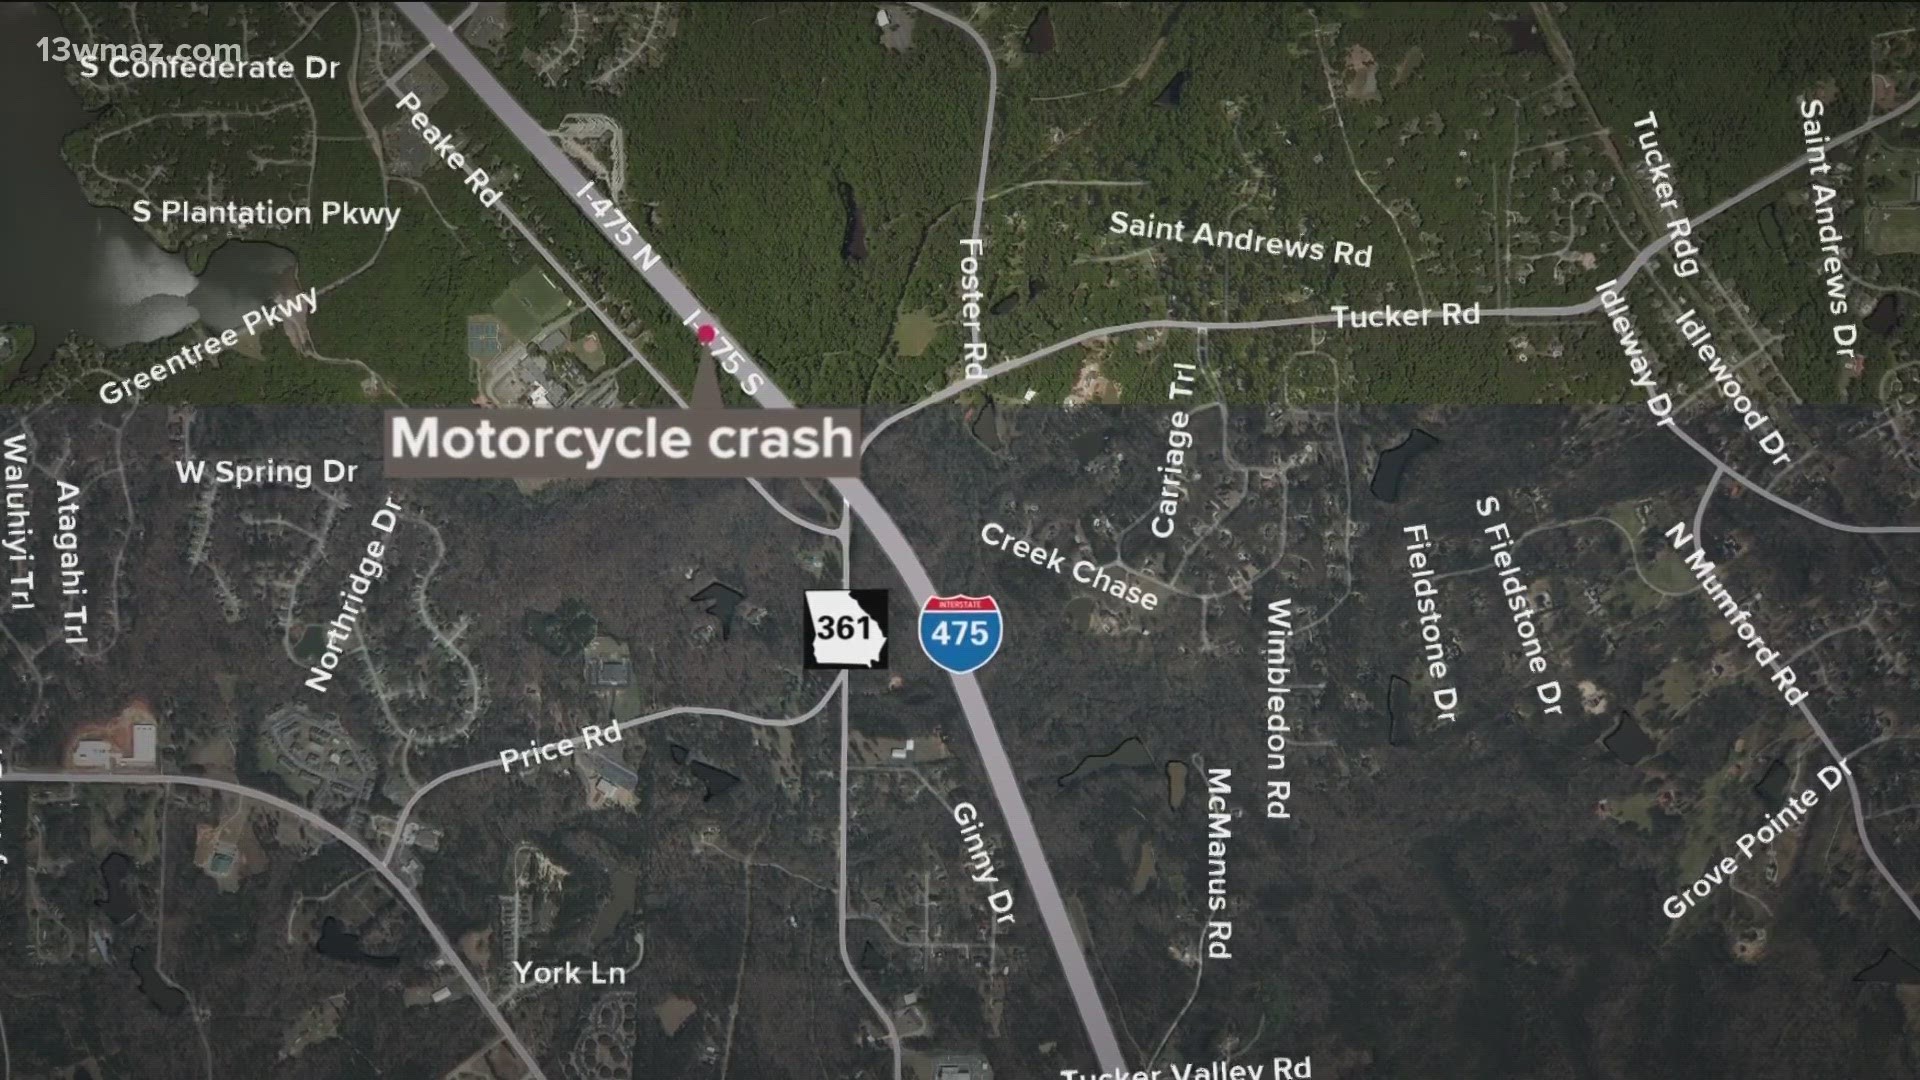 The motorcycle crashed into a guardrail.